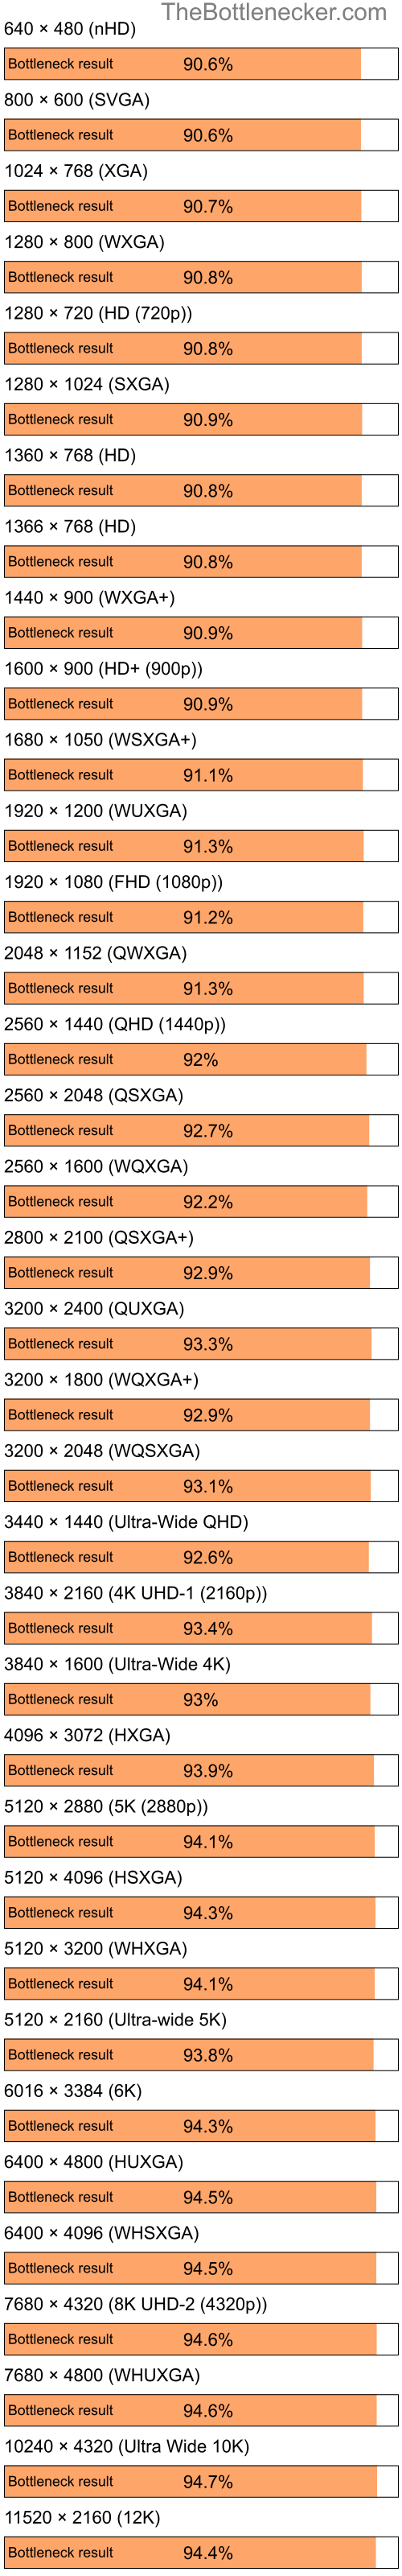 Bottleneck results by resolution for Intel Atom Z520 and AMD Mobility Radeon 9000 in7 Days to Die